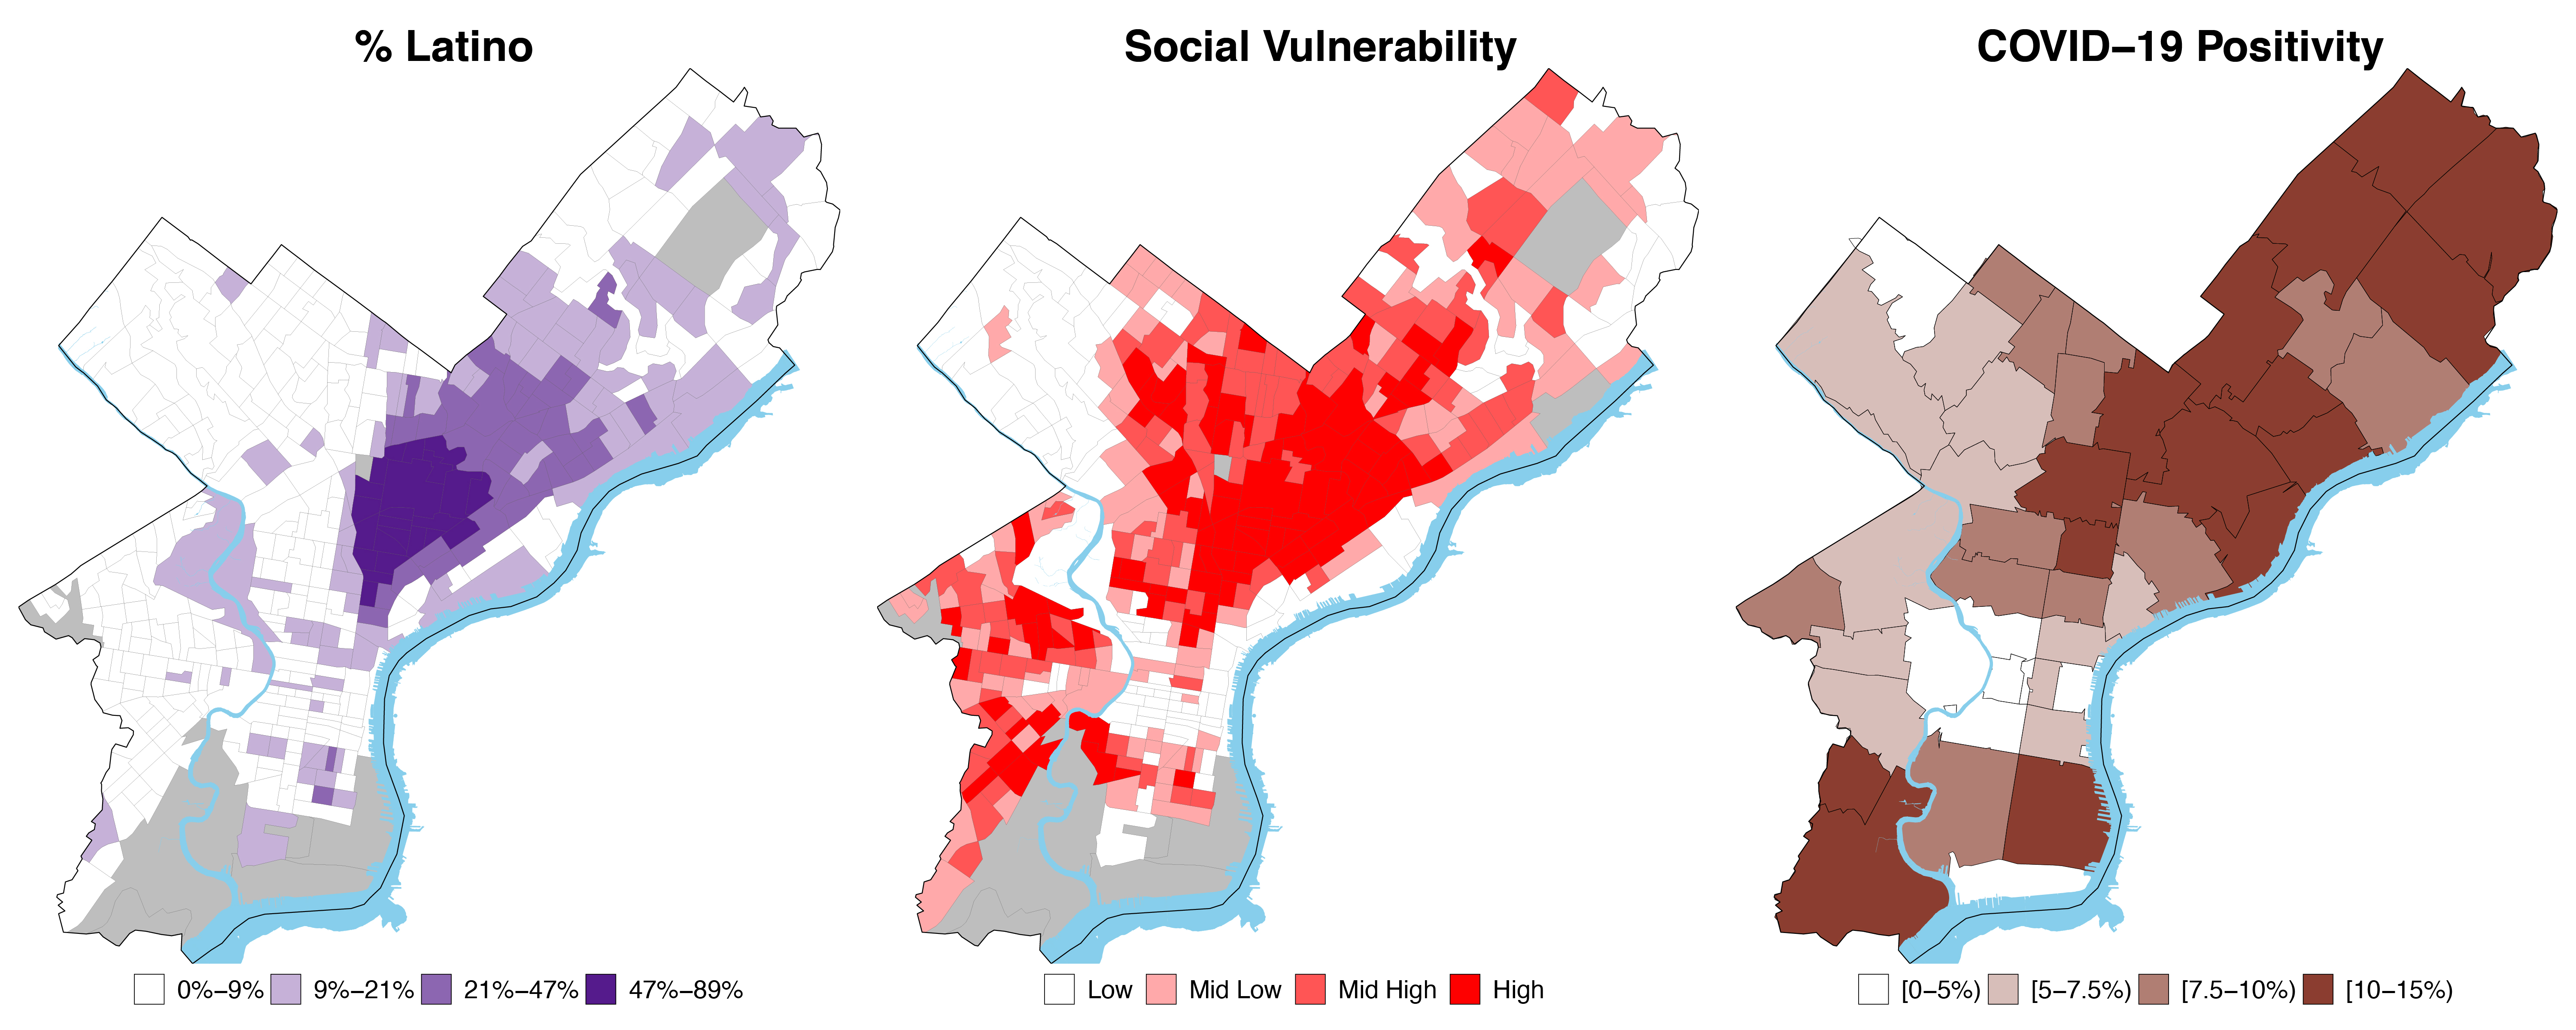 spatial distribution of Latinos, social vulnerability, and COVID-19 positivity